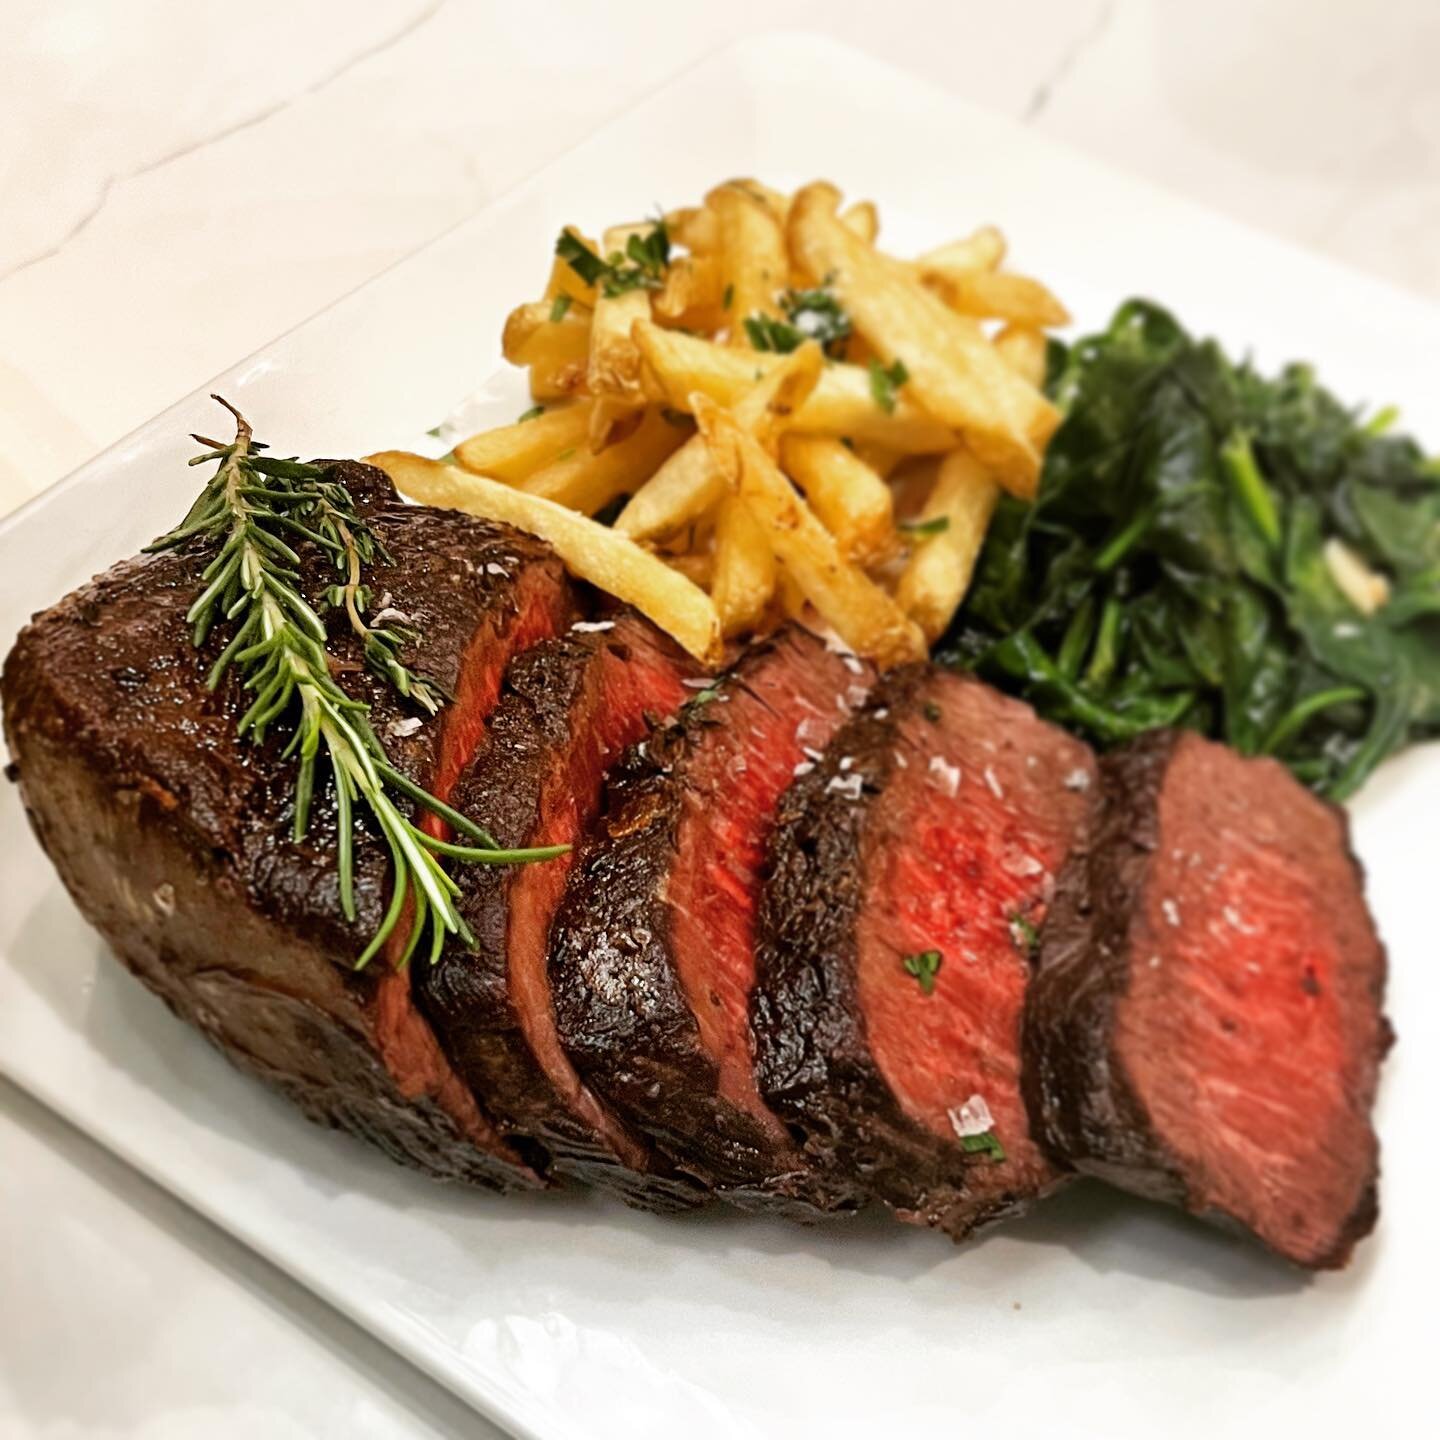 Amaroo Hills Farm Emu Drum Steak &amp; Frites with Saut&eacute;ed Apinach (garlic aioli not in frame). This is an AGS-safe (Alpha Gal Syndrome) alternative to a traditional steak, and cooked rare, it does not disappoint! #ags #alphagal #alphagalaller